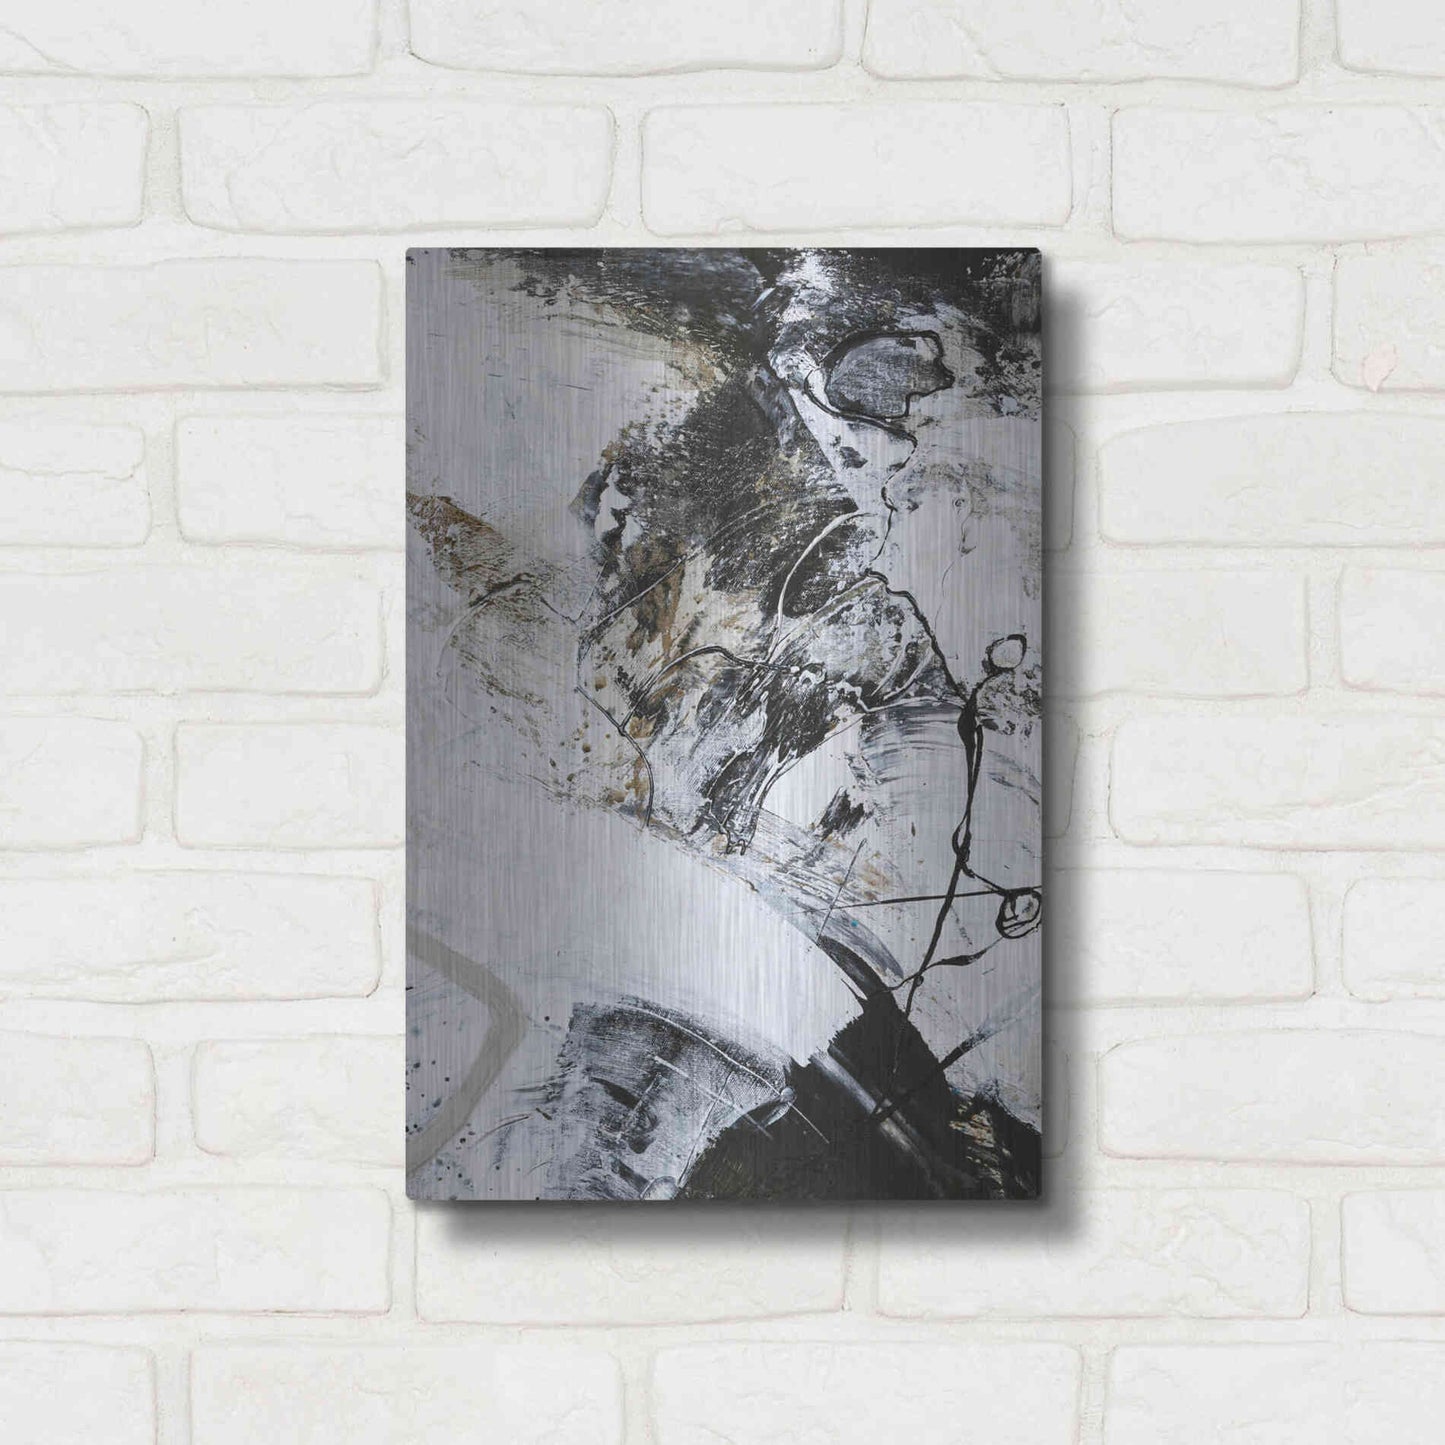 Luxe Metal Art 'Black and White 1' by Design Fabrikken, Metal Wall Art,12x16